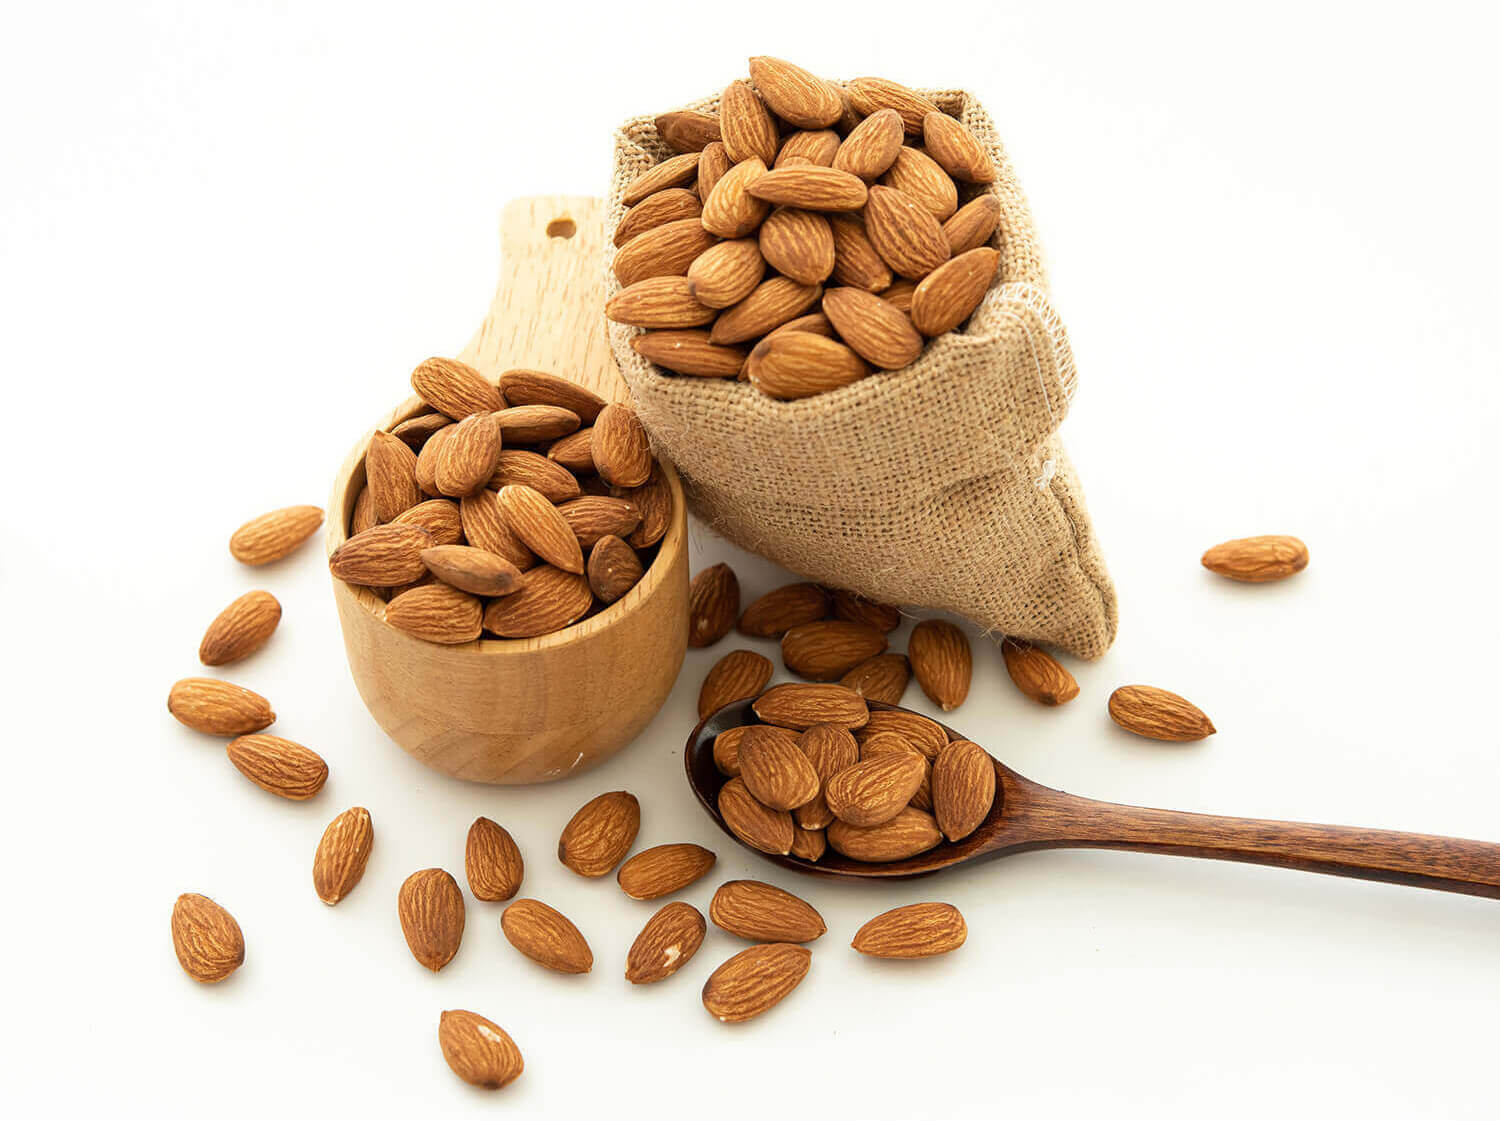 Benefits of Almonds for Brain health and skin